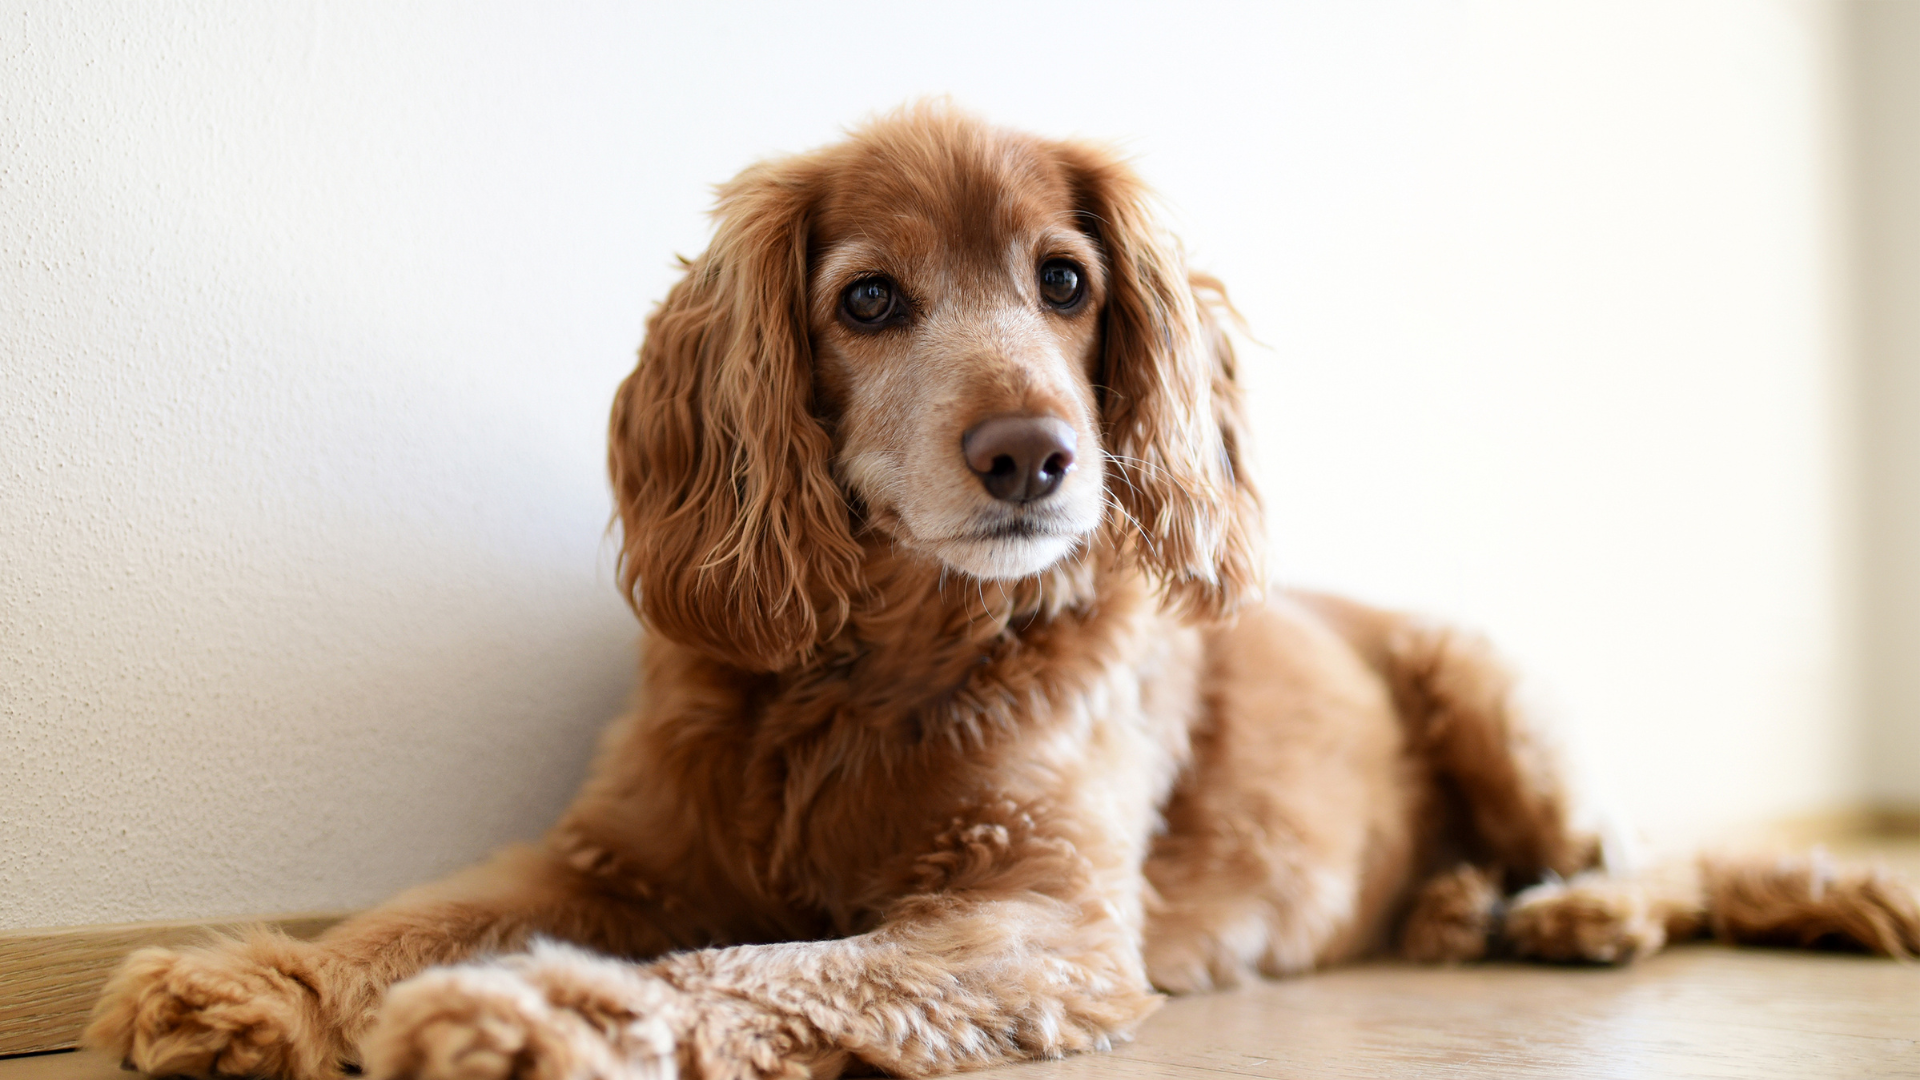 Natural Remedies for Common Dog Issues